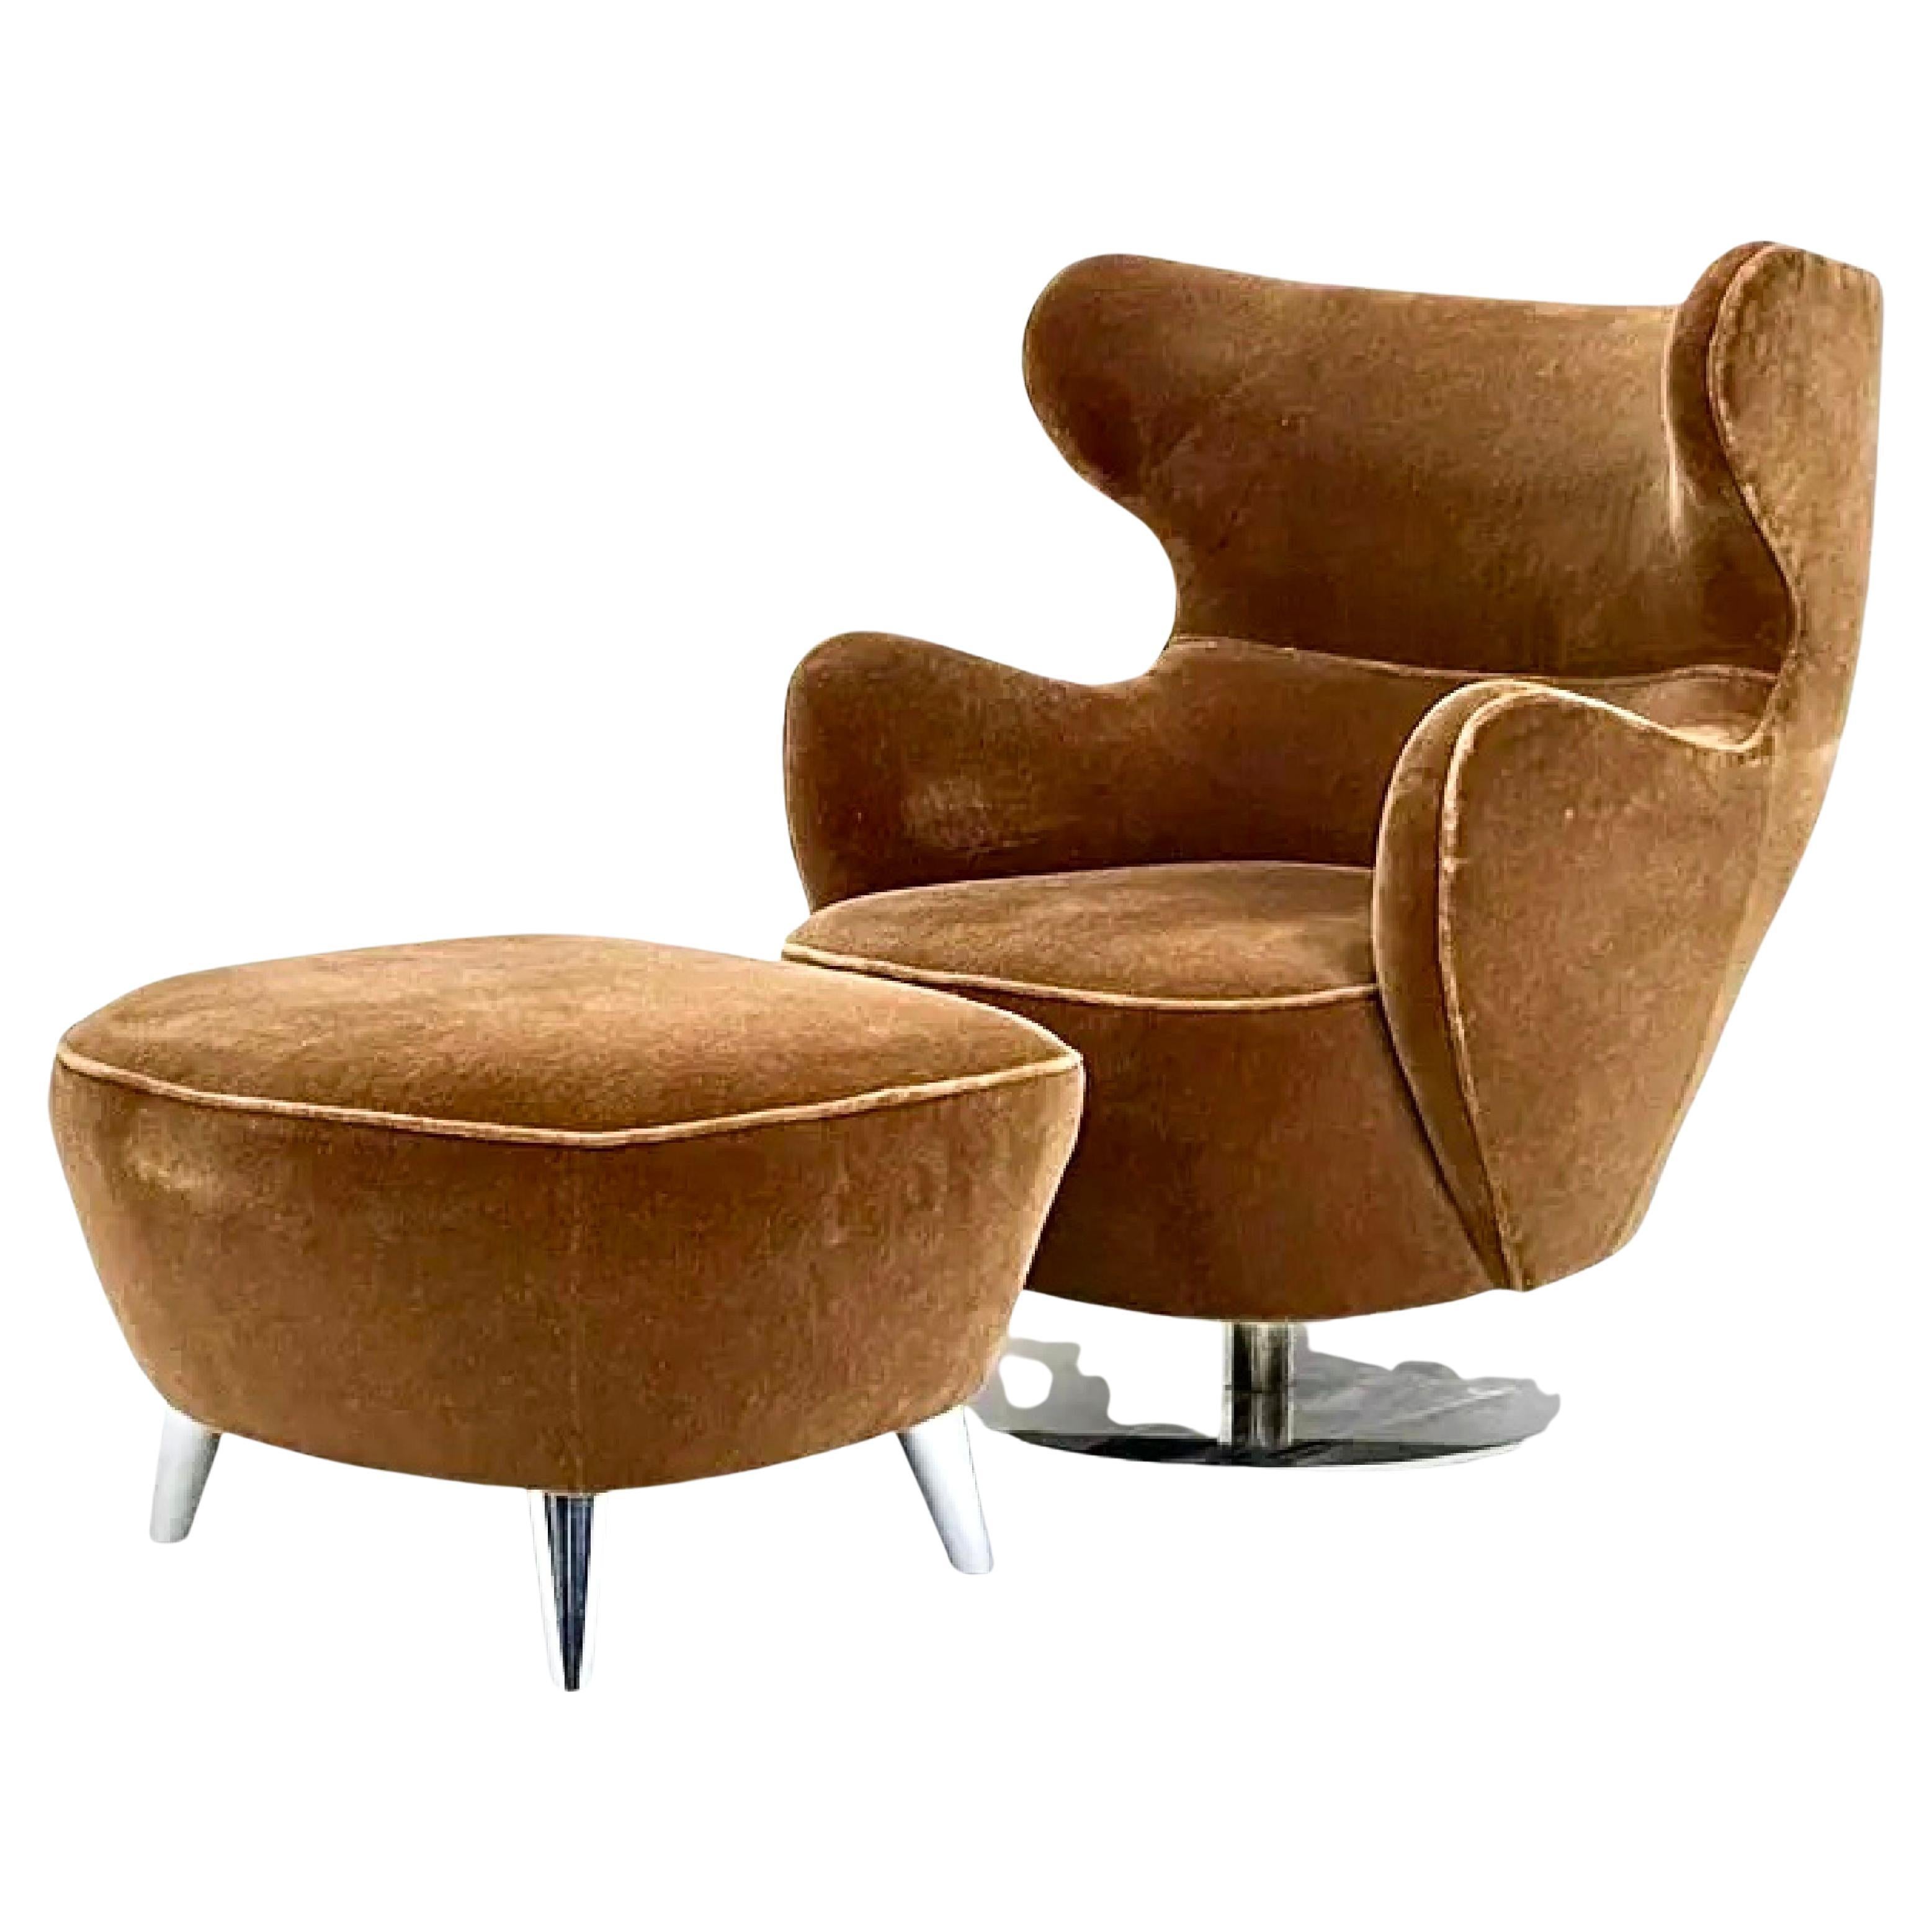 Vladimir Kagan 100C-S Mohair Wing Chair & 100BF Barrel Ottoman, Polished Nickel, Holly Hunt. Gorgeous Amber Whiskey Mohair Custom piece. Rare metal swivel base version in polished nickel. 
Designed in 1947 yet remarkably compatible with contemporary